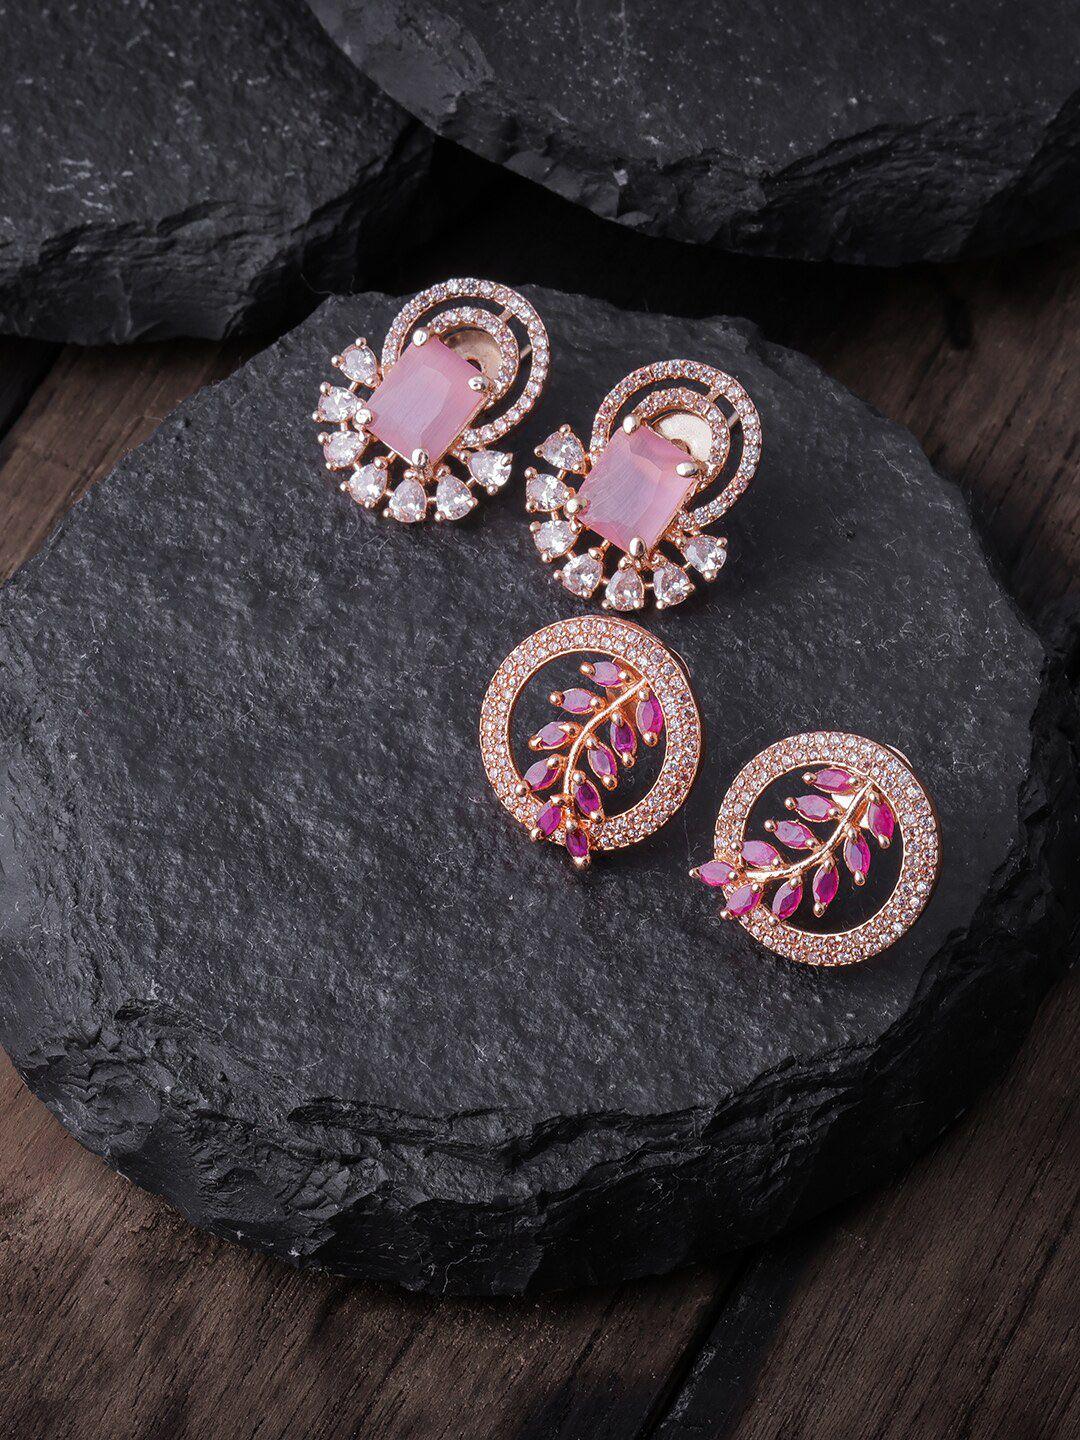 brandsoon pack of 2 pink & white rose gold-plated ad-studded circular studs earrings